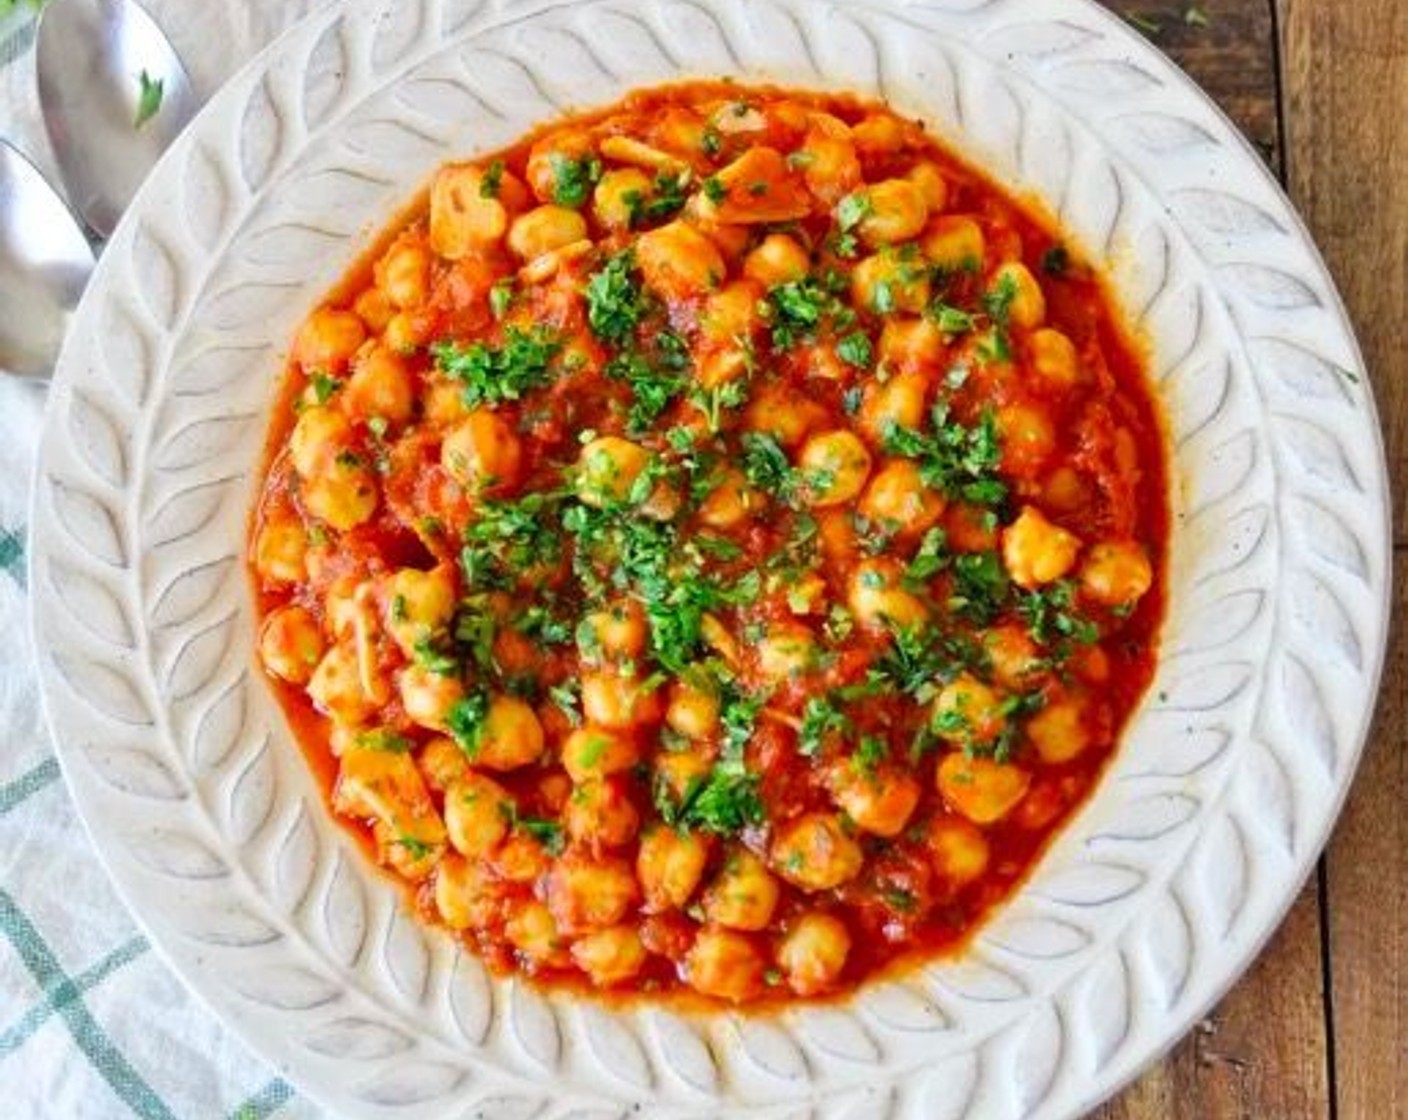 Spanish Chickpeas with Spicy Paprika Tomato Sauce